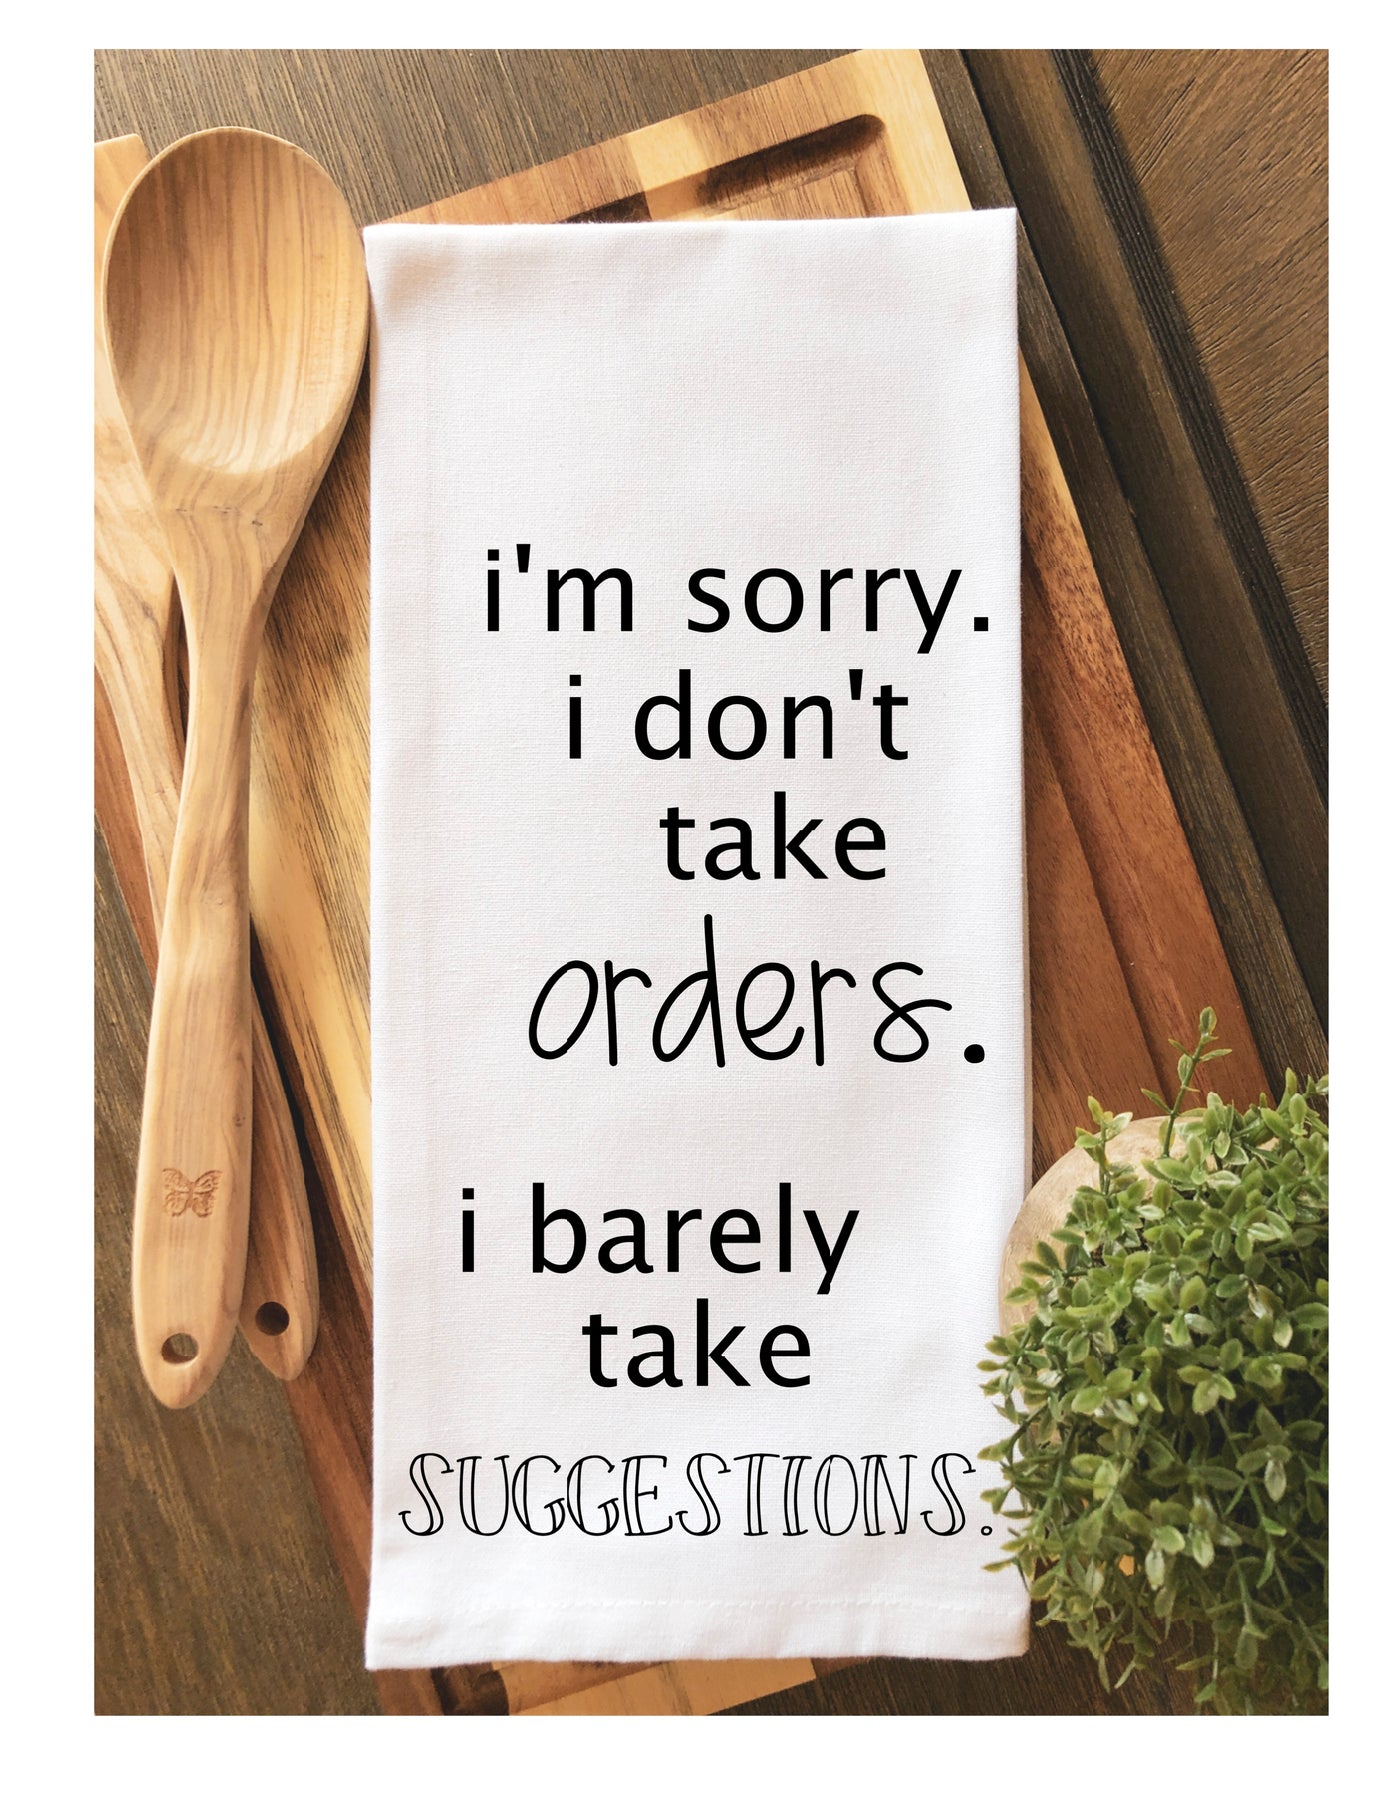 i don't take orders, barely take suggestions - humorous tea, bar and kitchen towel LG